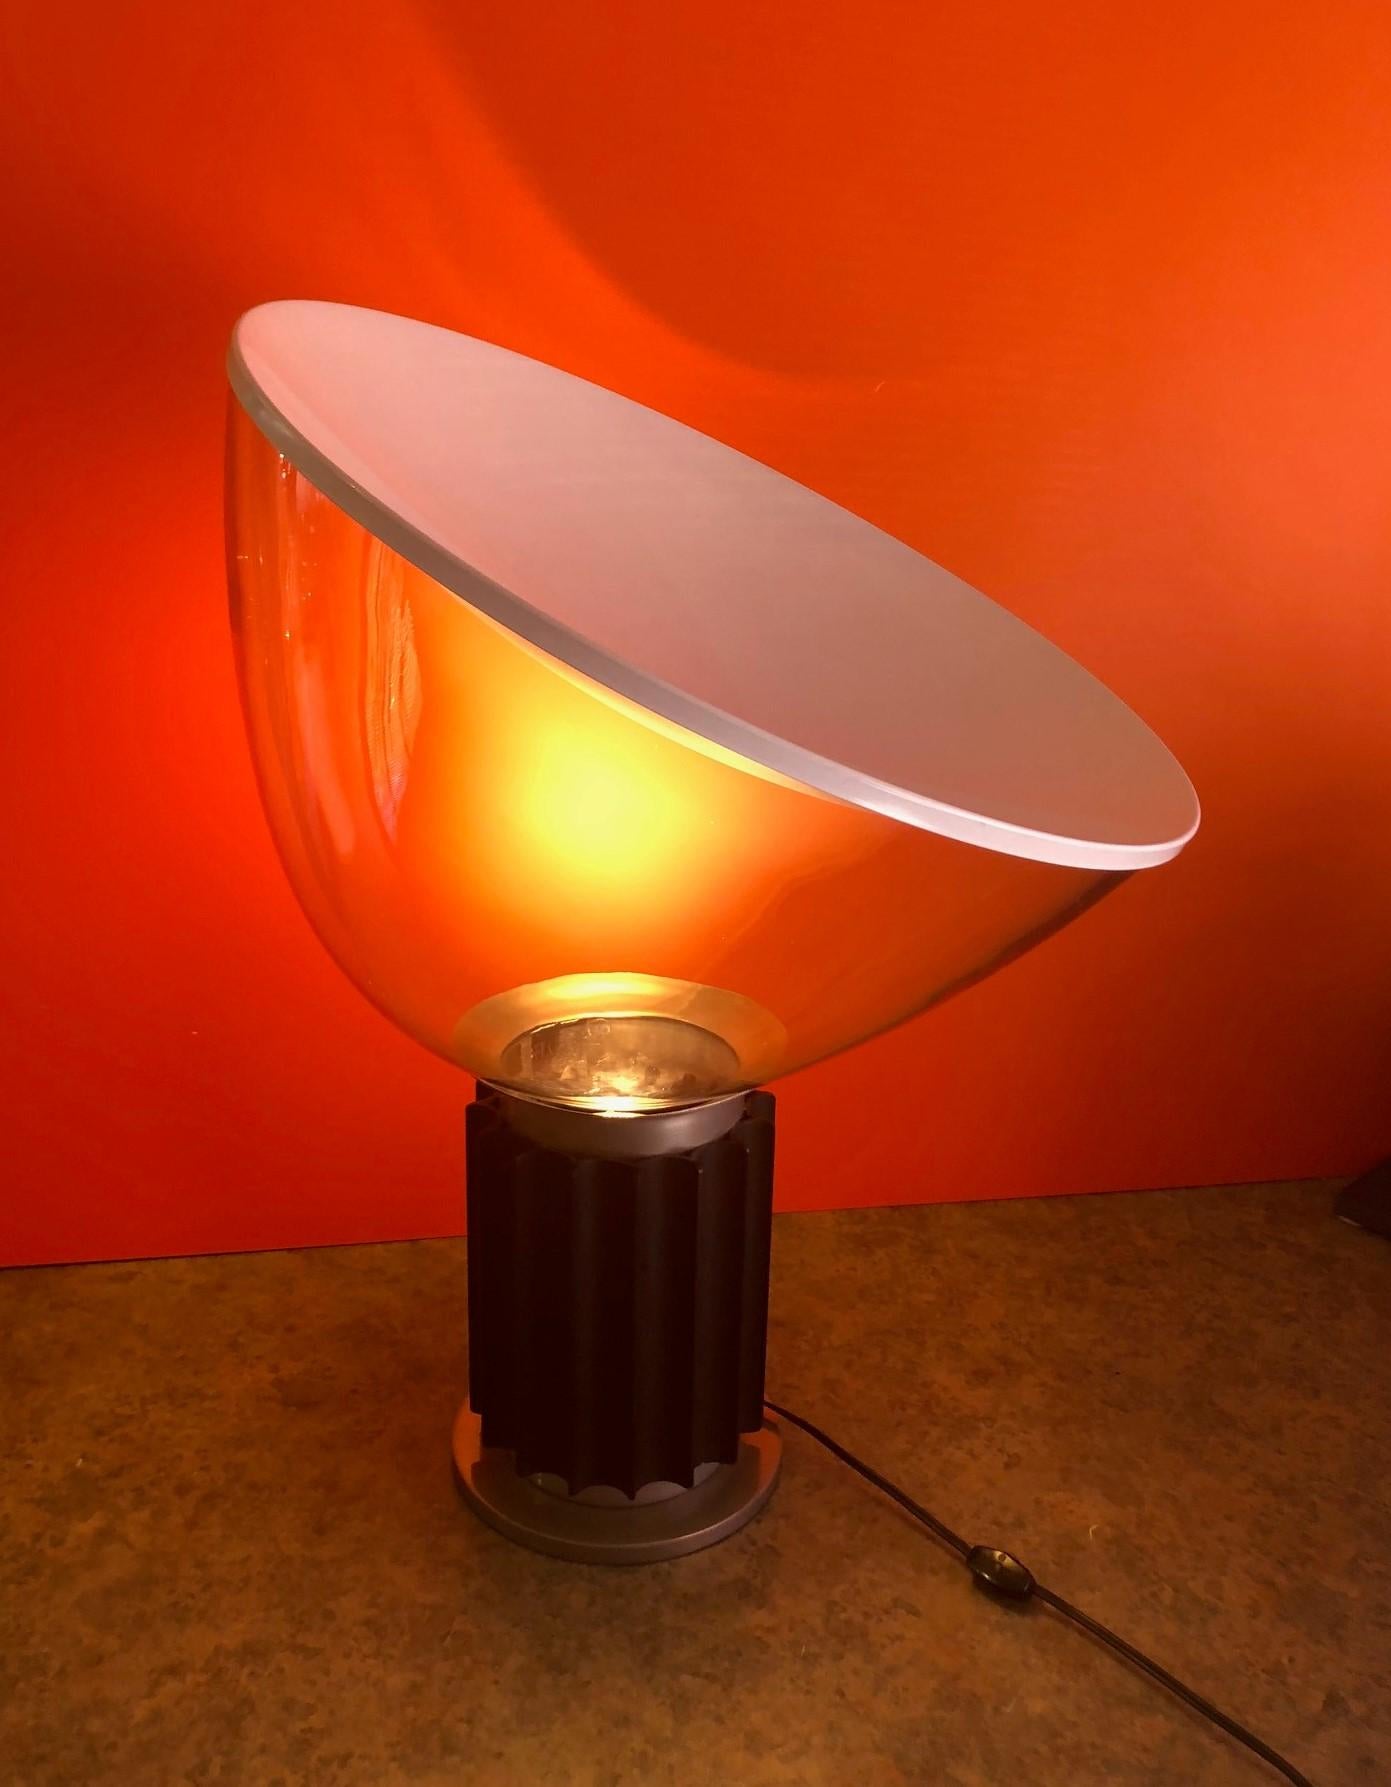 20th Century Taccia Table Lamp Designed by Achille Castiglioni for Flos Early Production